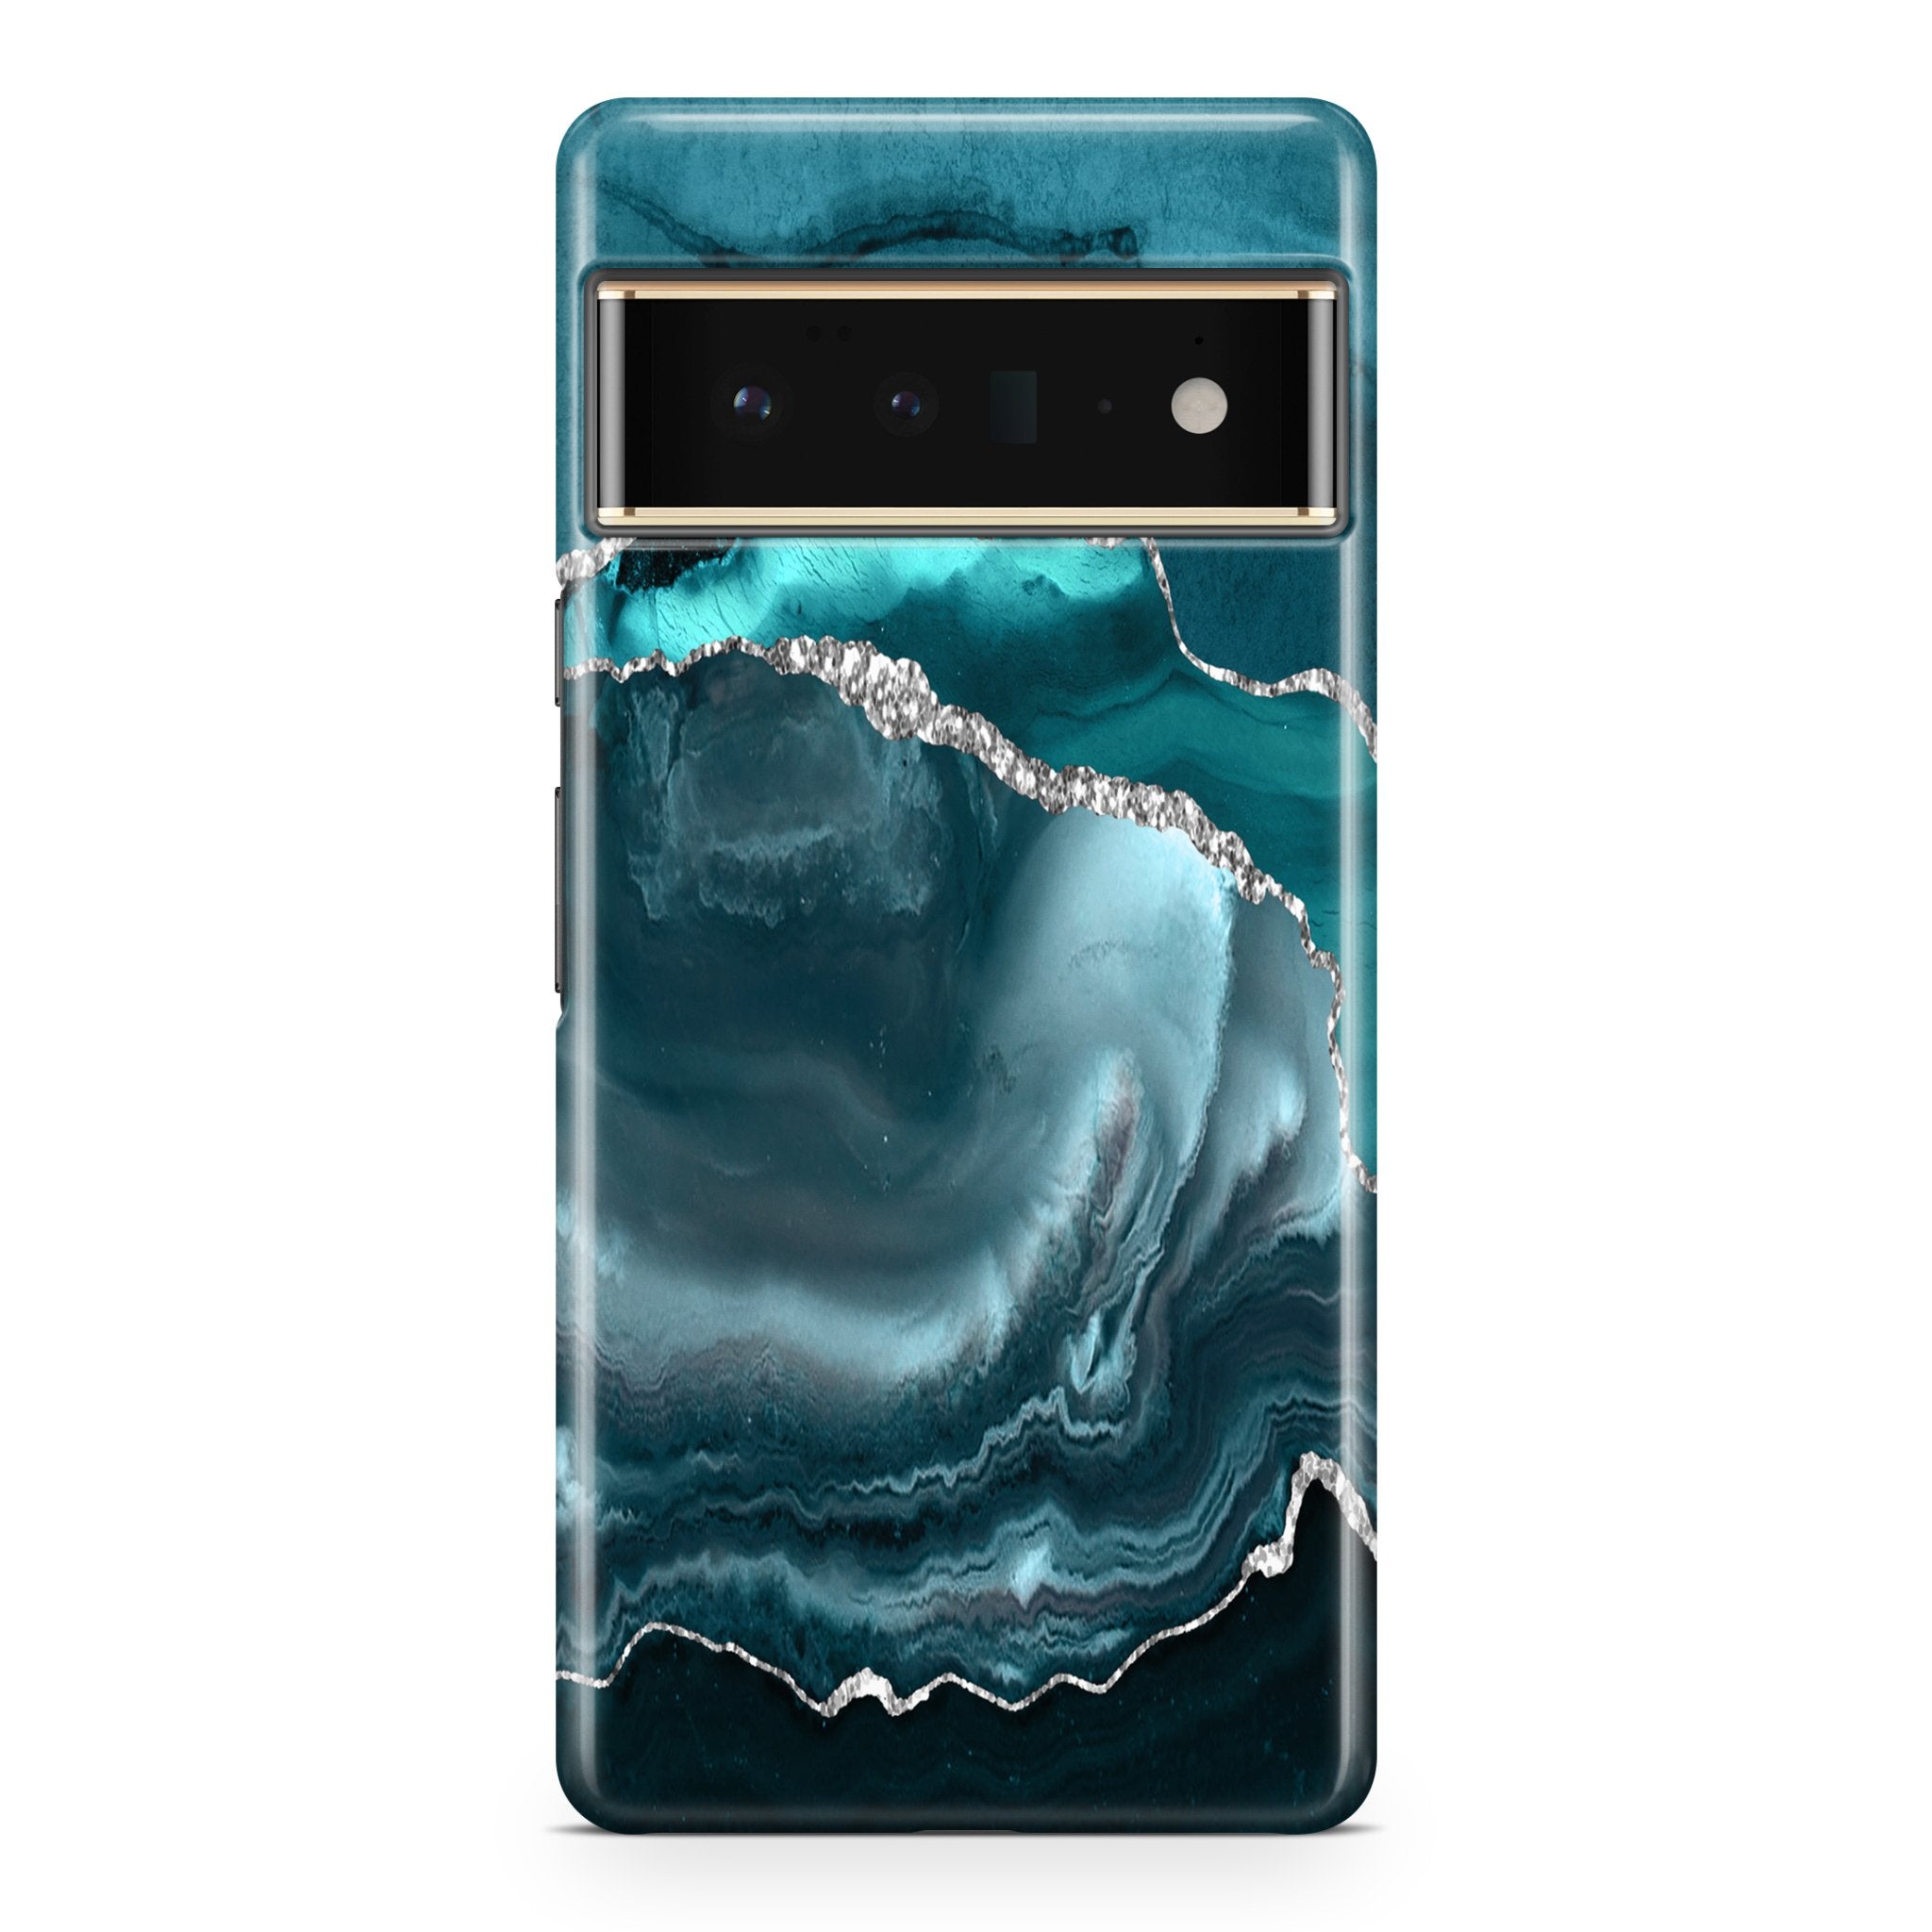 Teal Elegance III - Google phone case designs by CaseSwagger